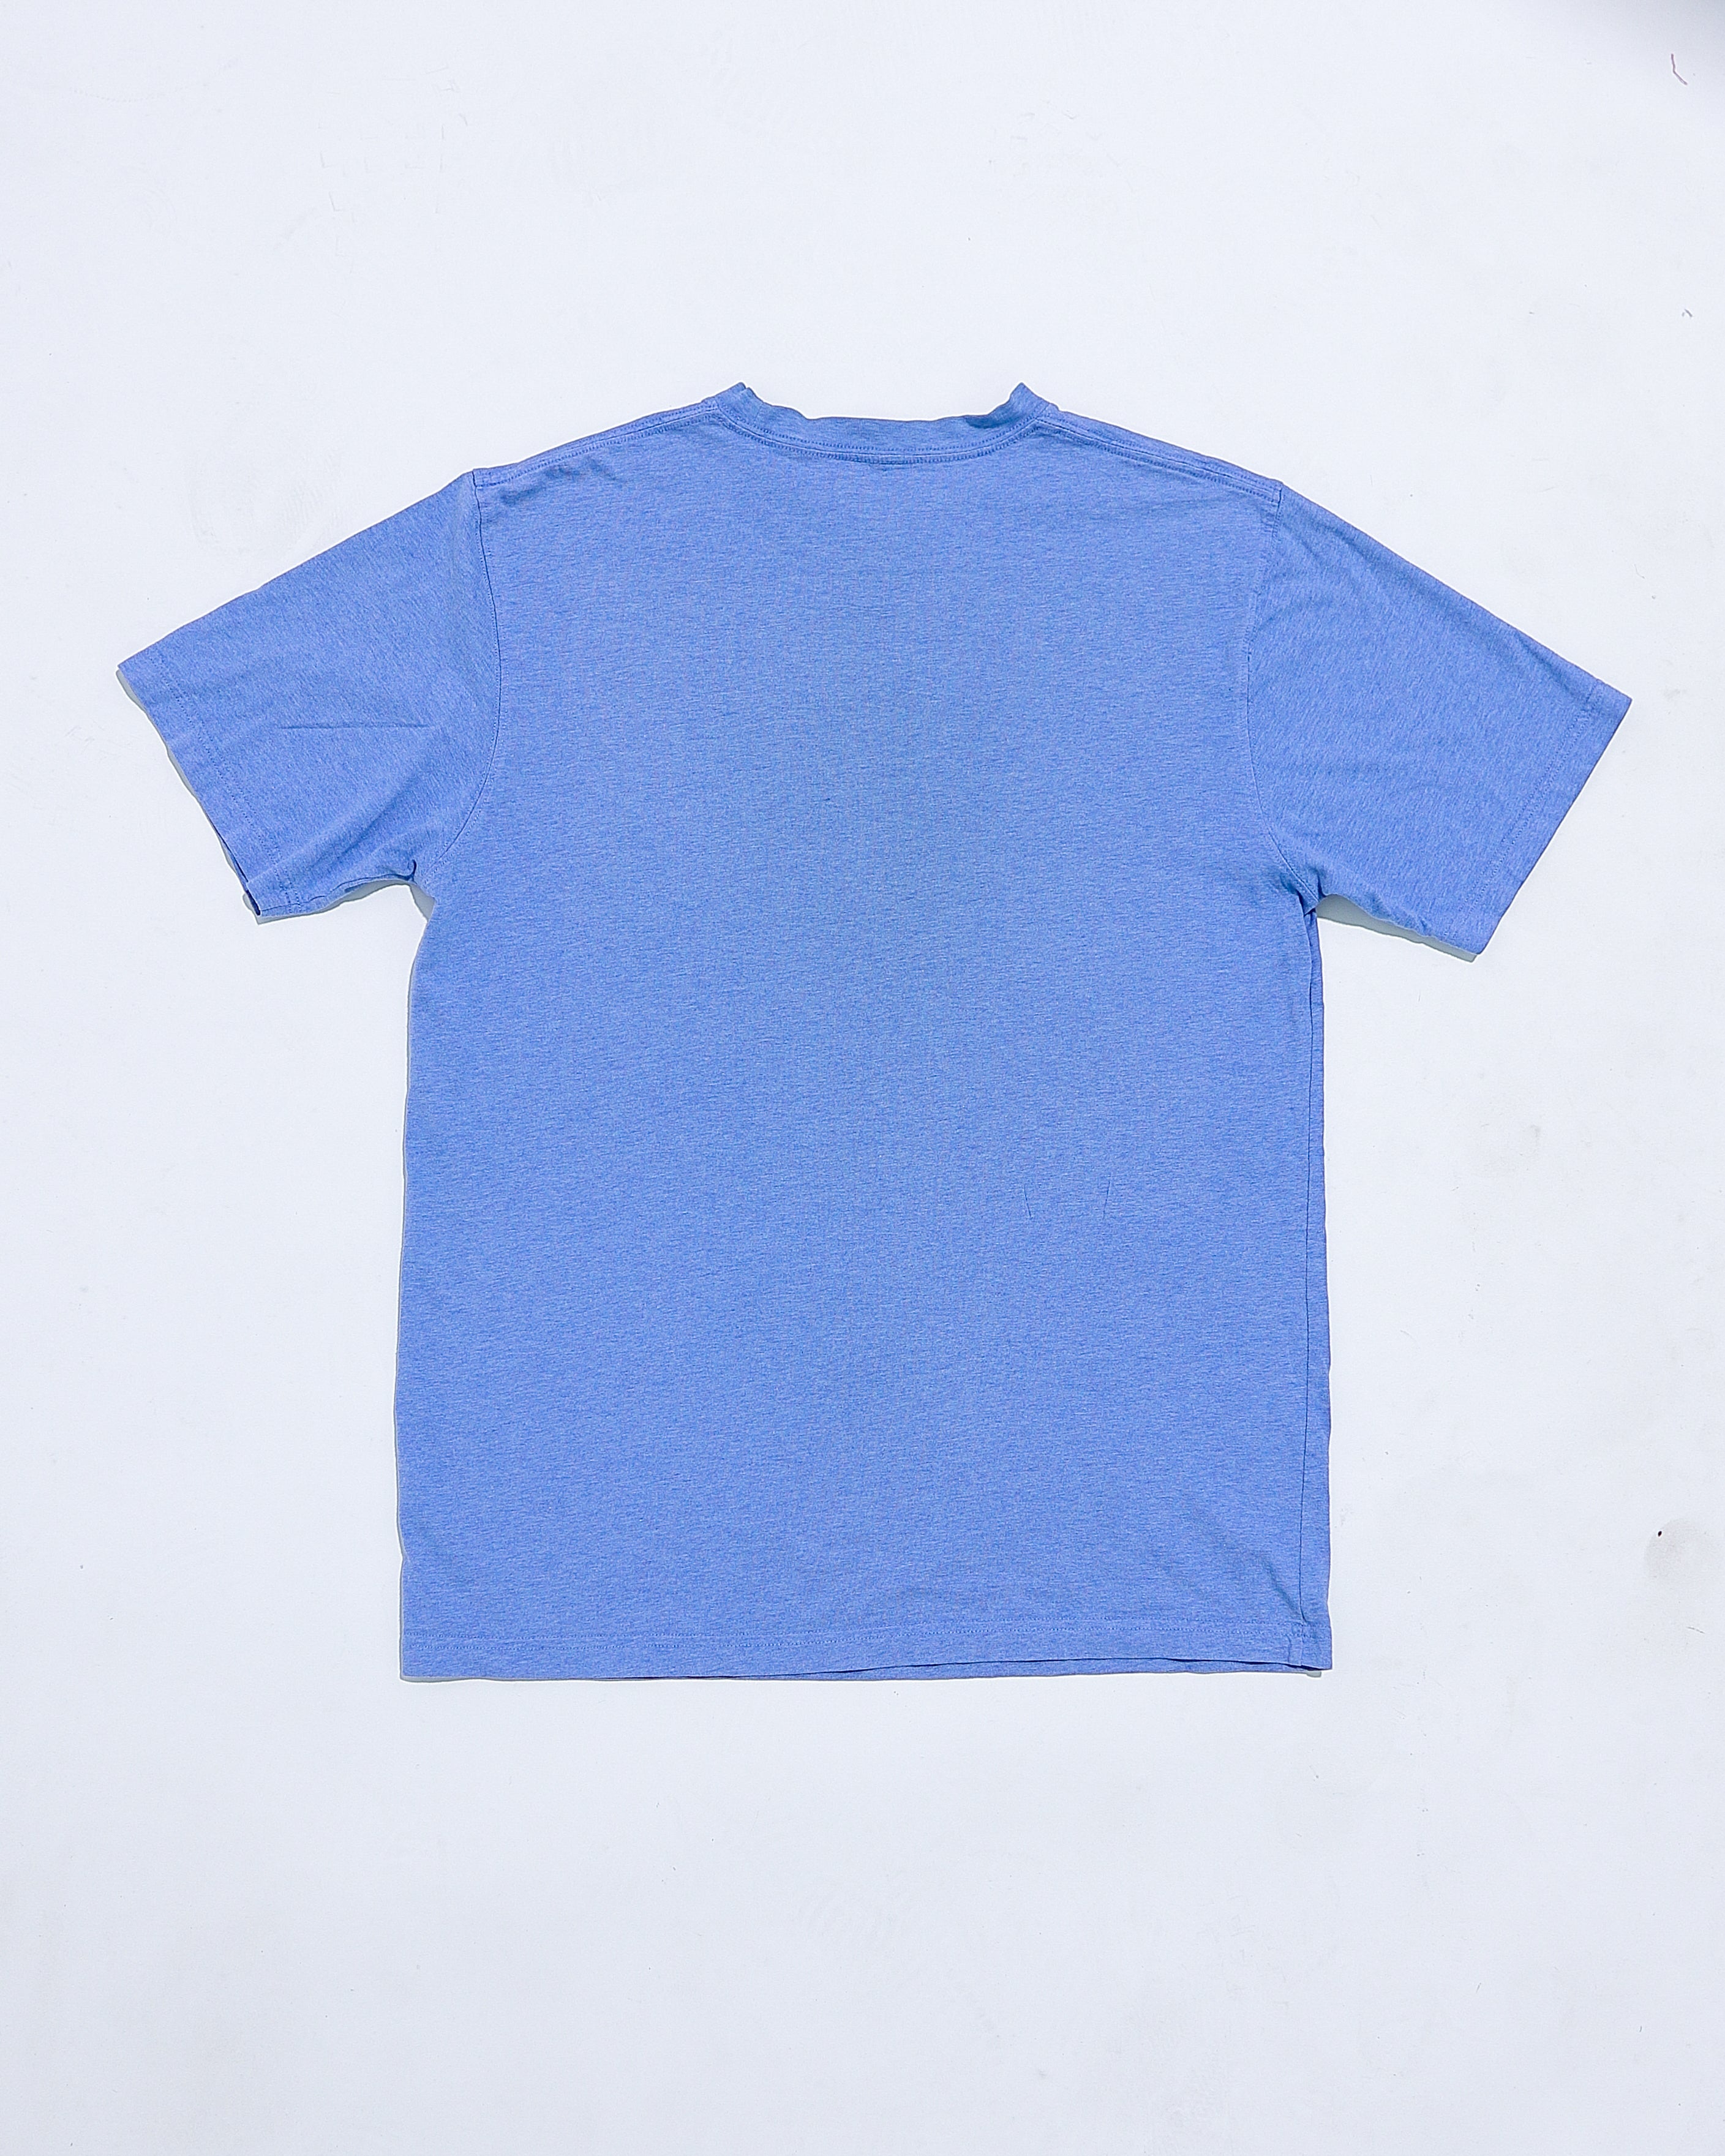 Alien Earth Day Tee - Ash Blue (Large)